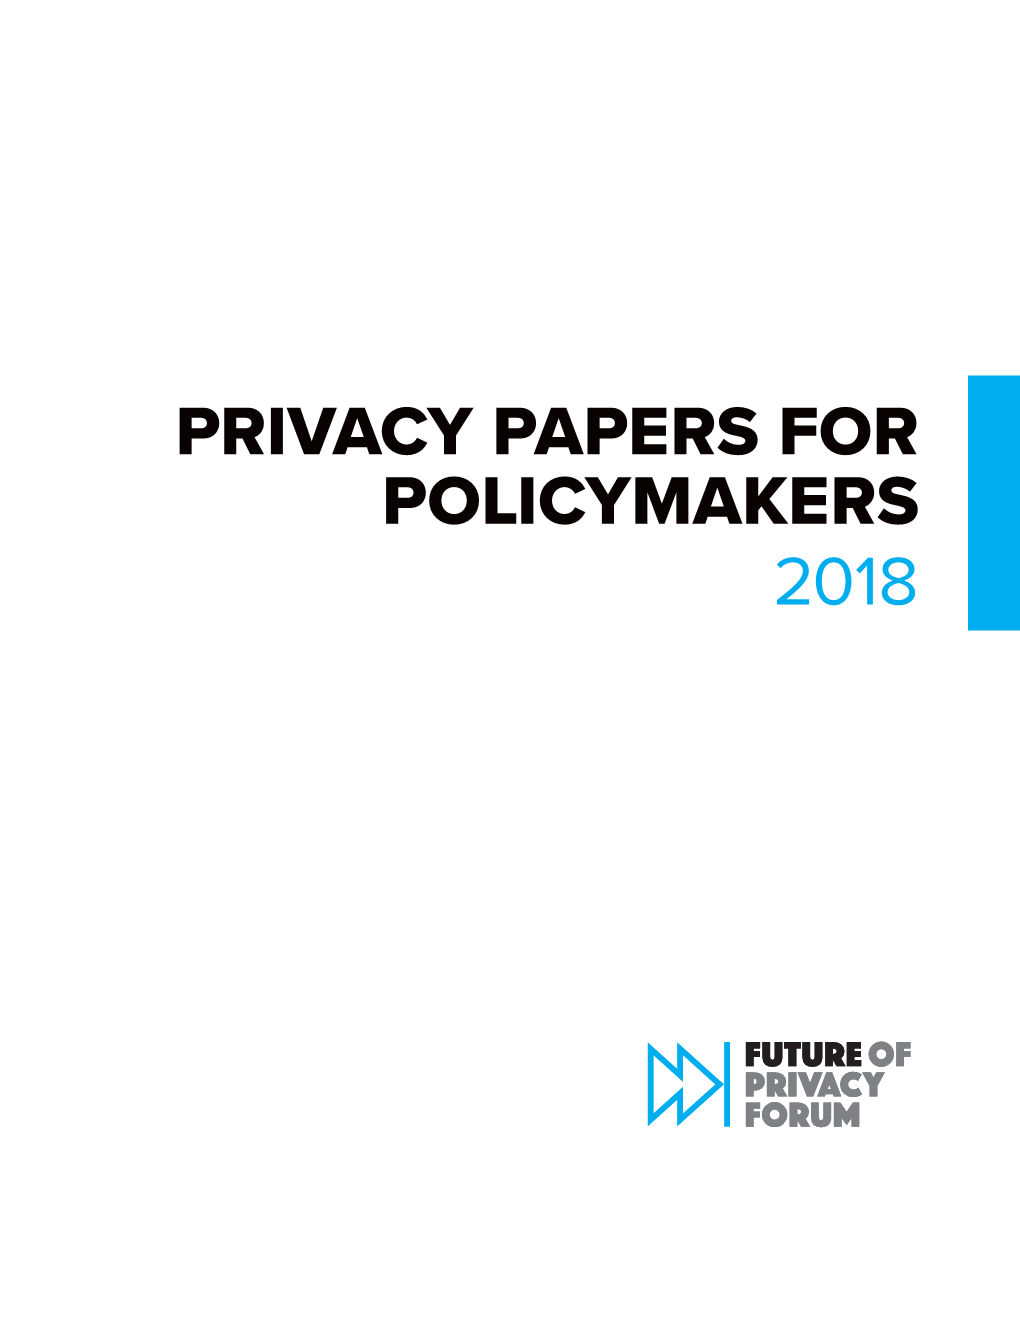 PRIVACY PAPERS for POLICYMAKERS 2018 February 6, 2019